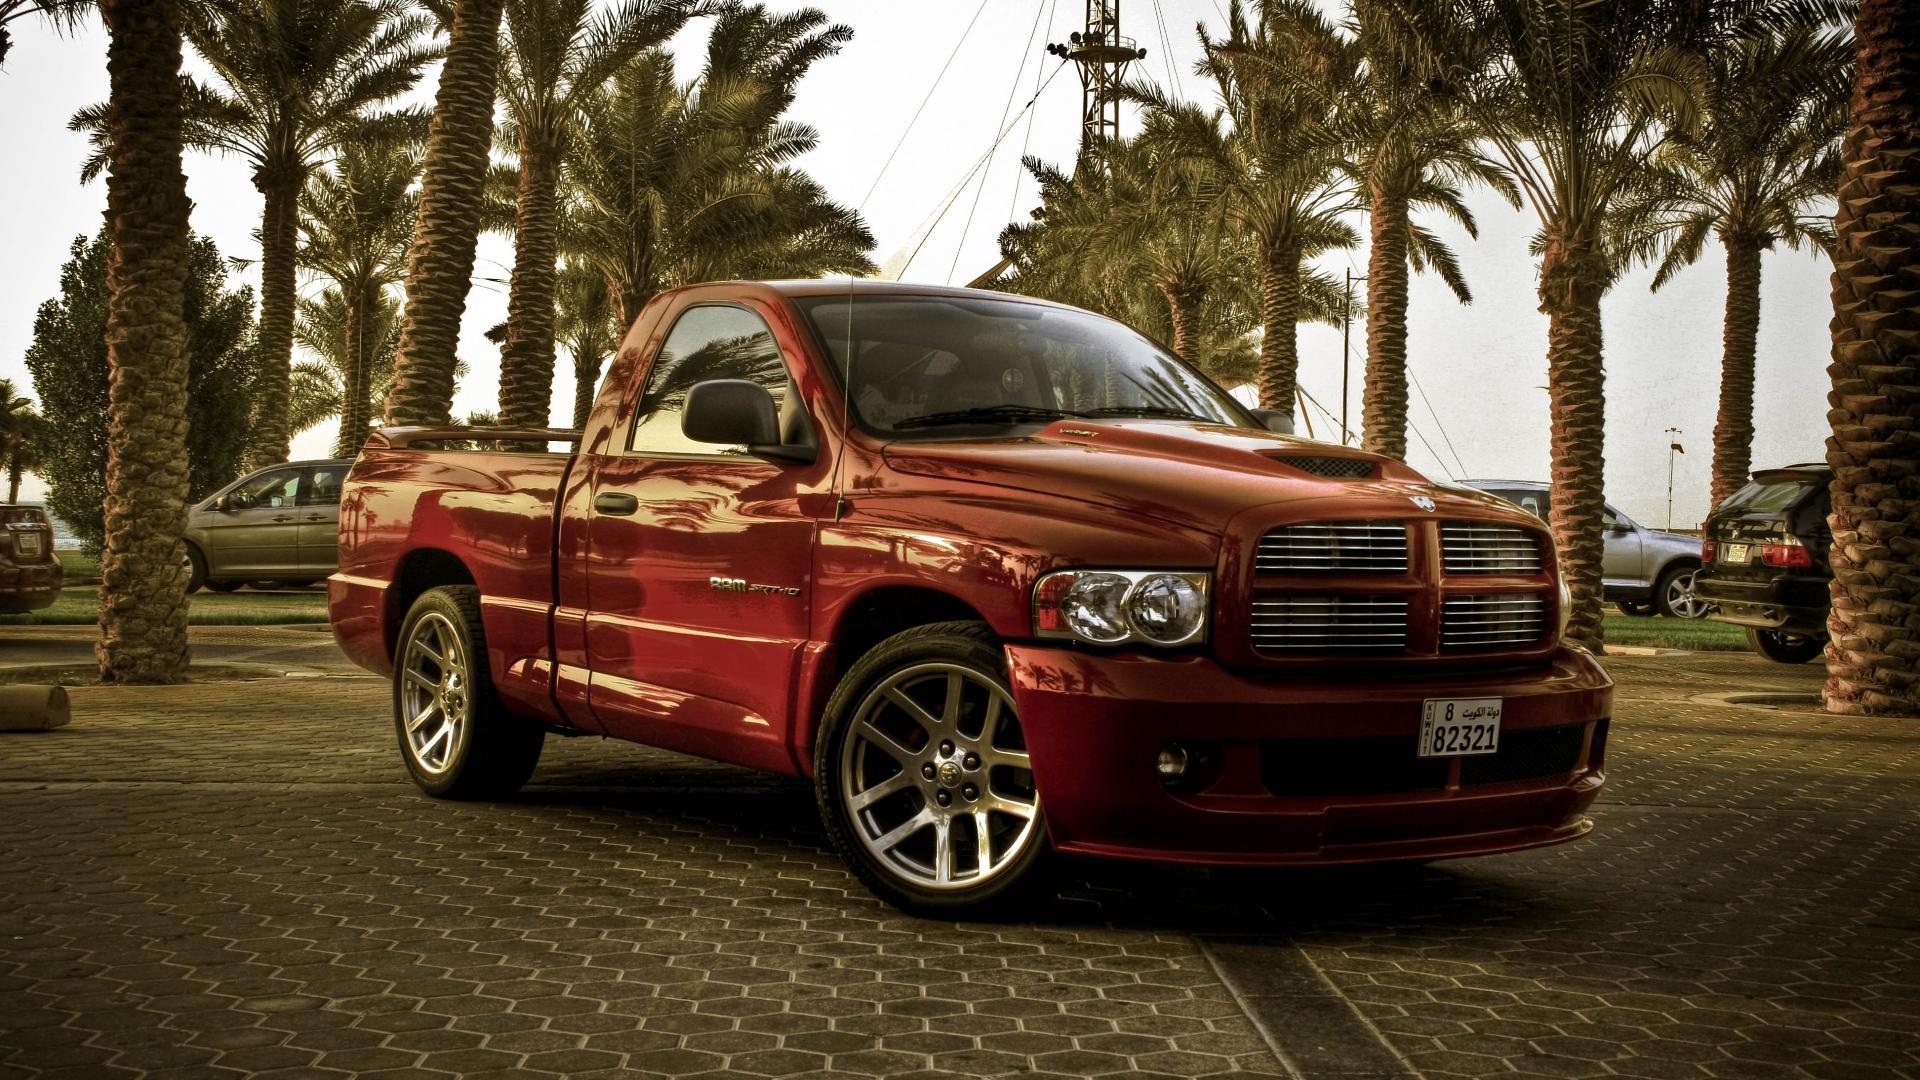 Dodge Ram Spesification Ram 1500 Review and Engine